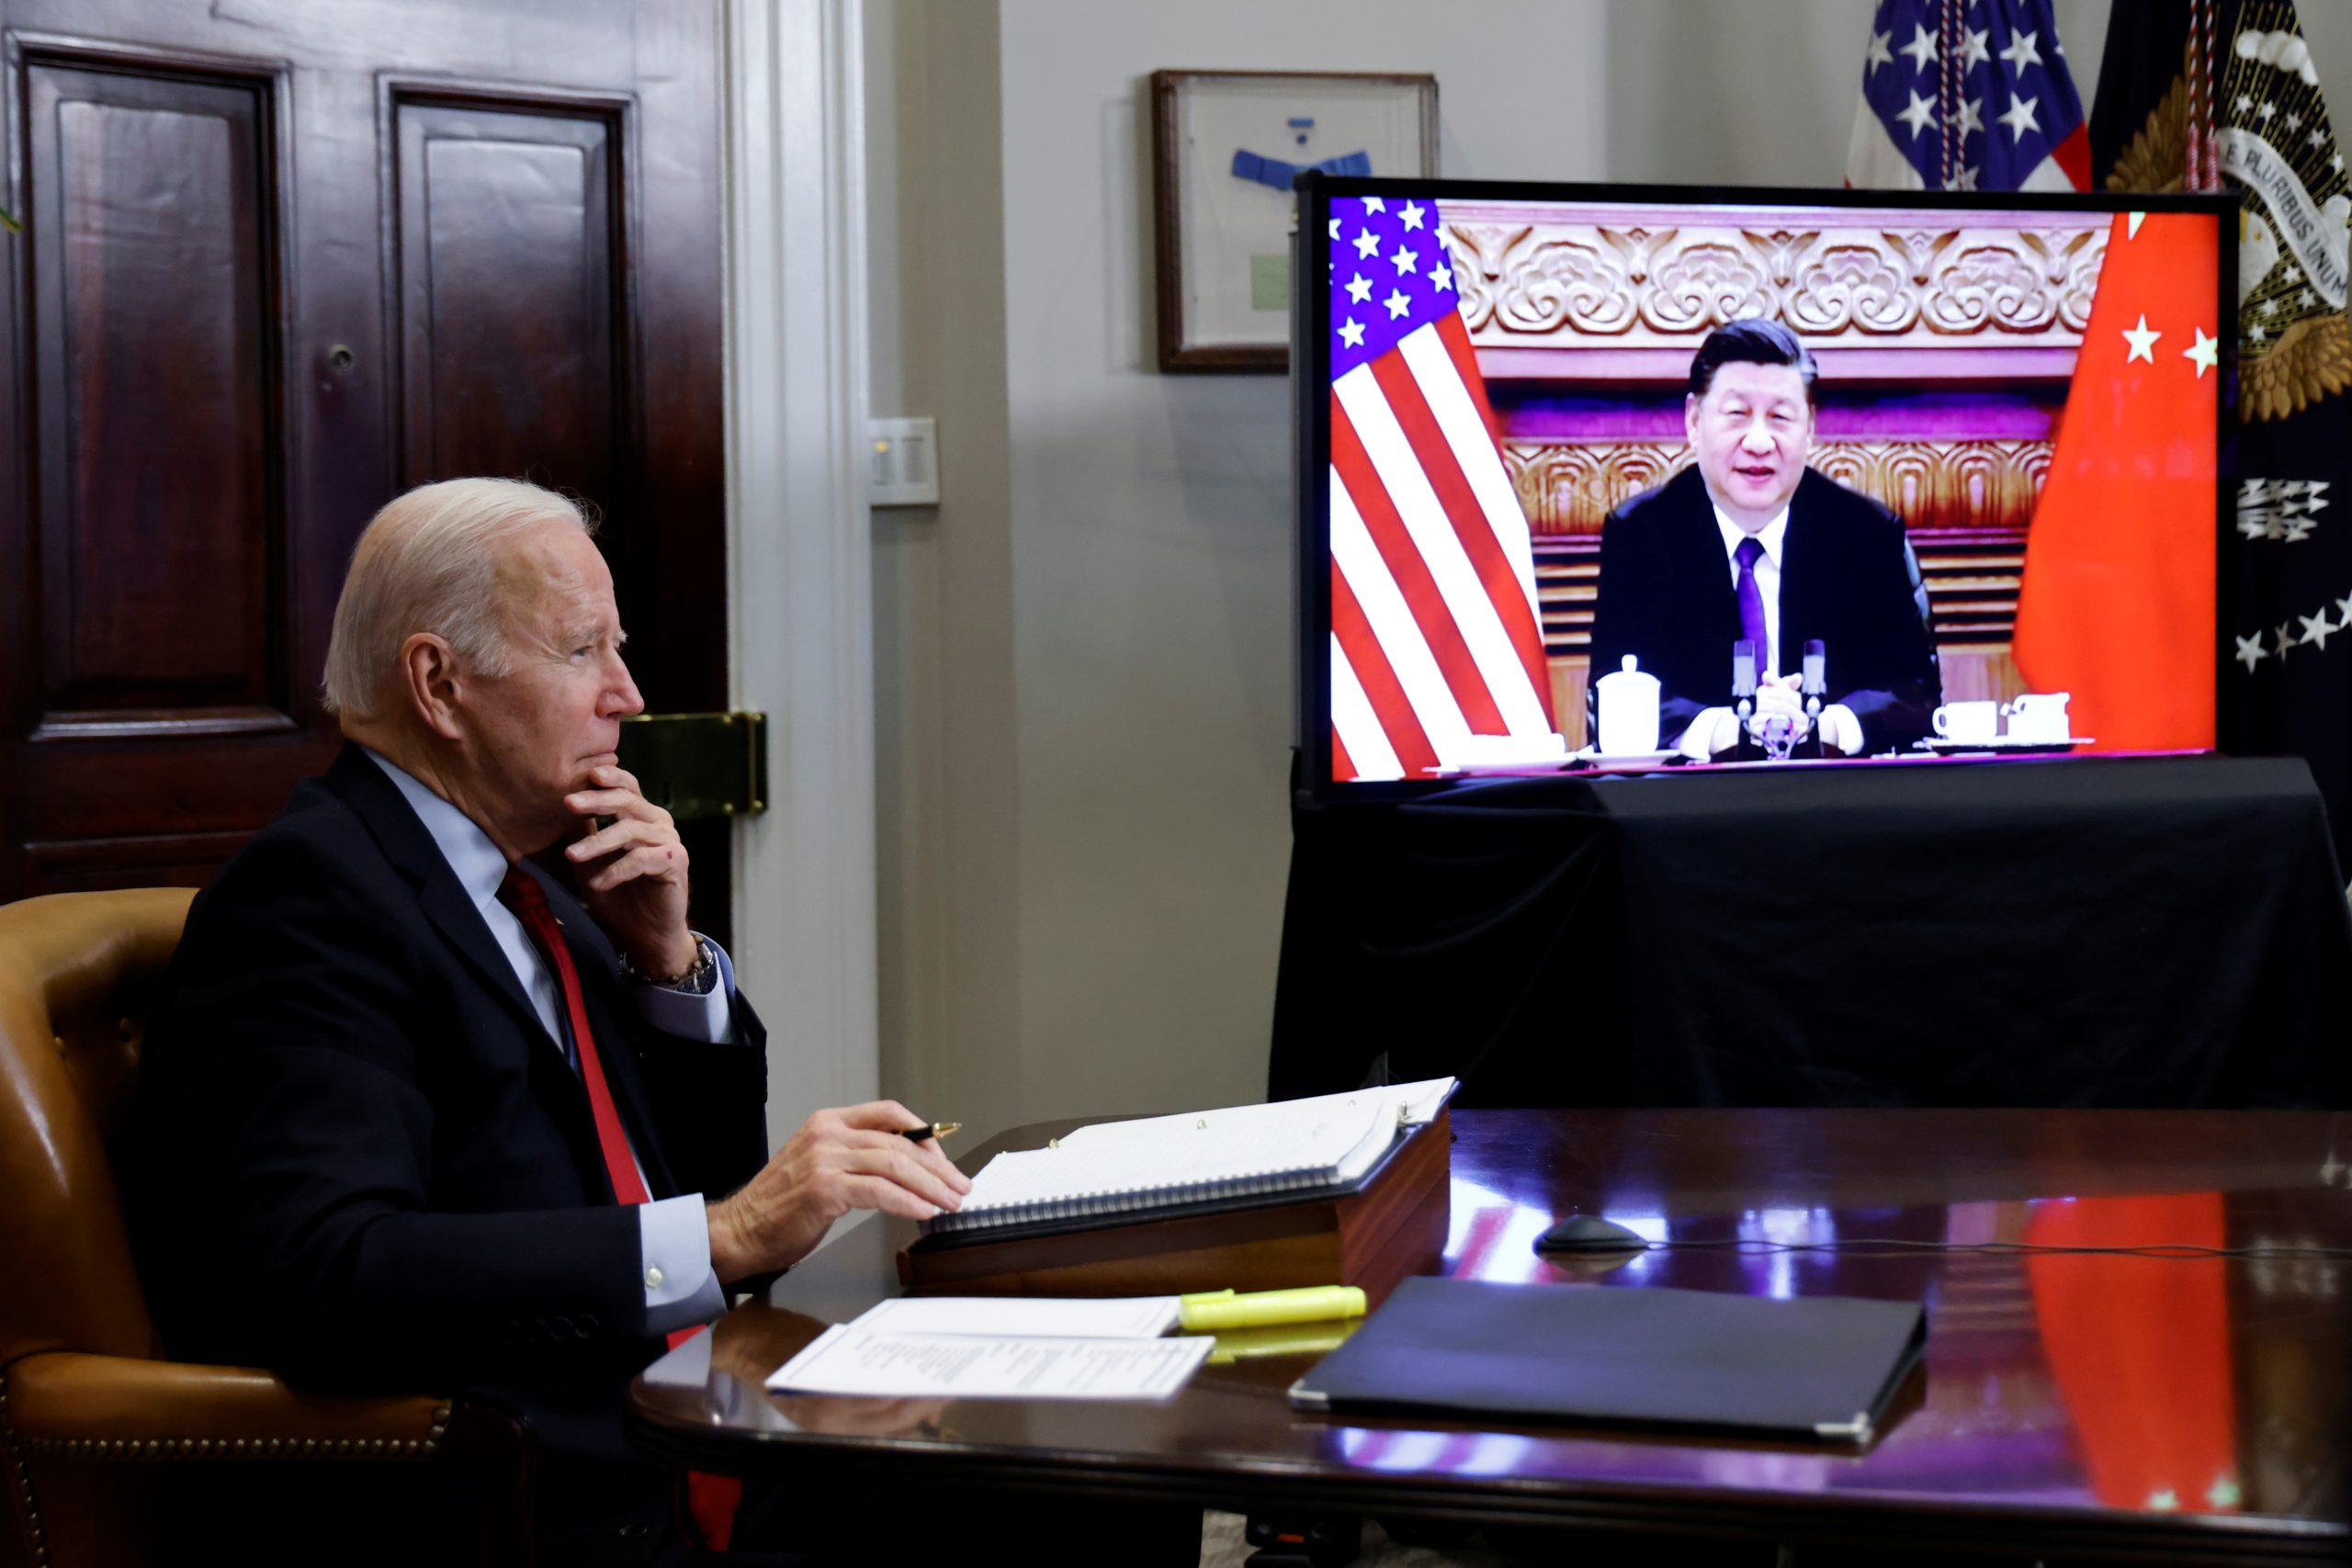 The competition between the US and China will continue to be of major influence. President Biden and President Xi in their virtual meeting